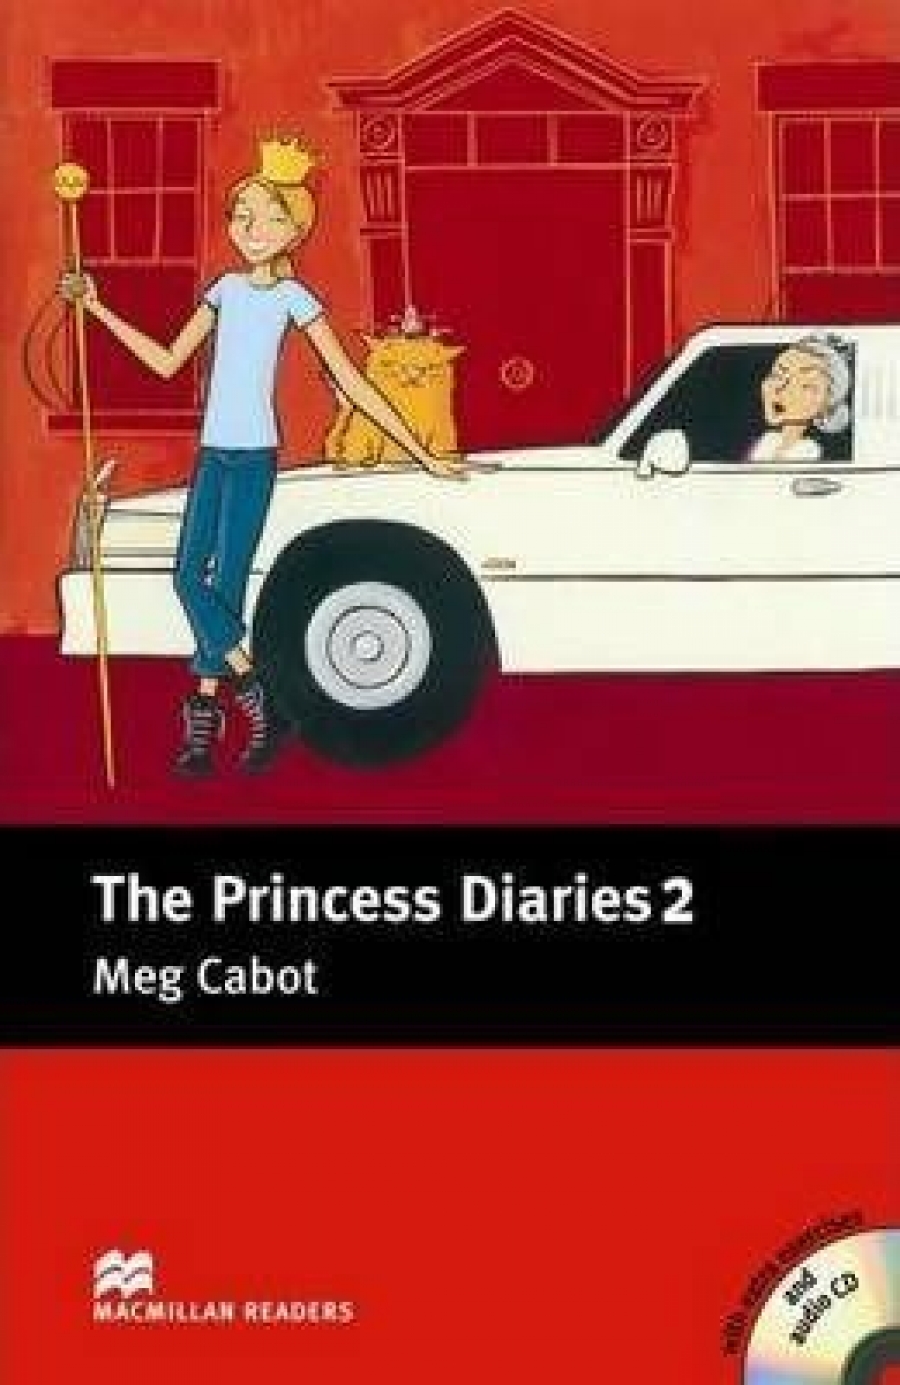 Meg Cabot, retold by Anne Collins The Princess Diaries: Book 2 (with Audio CD) 